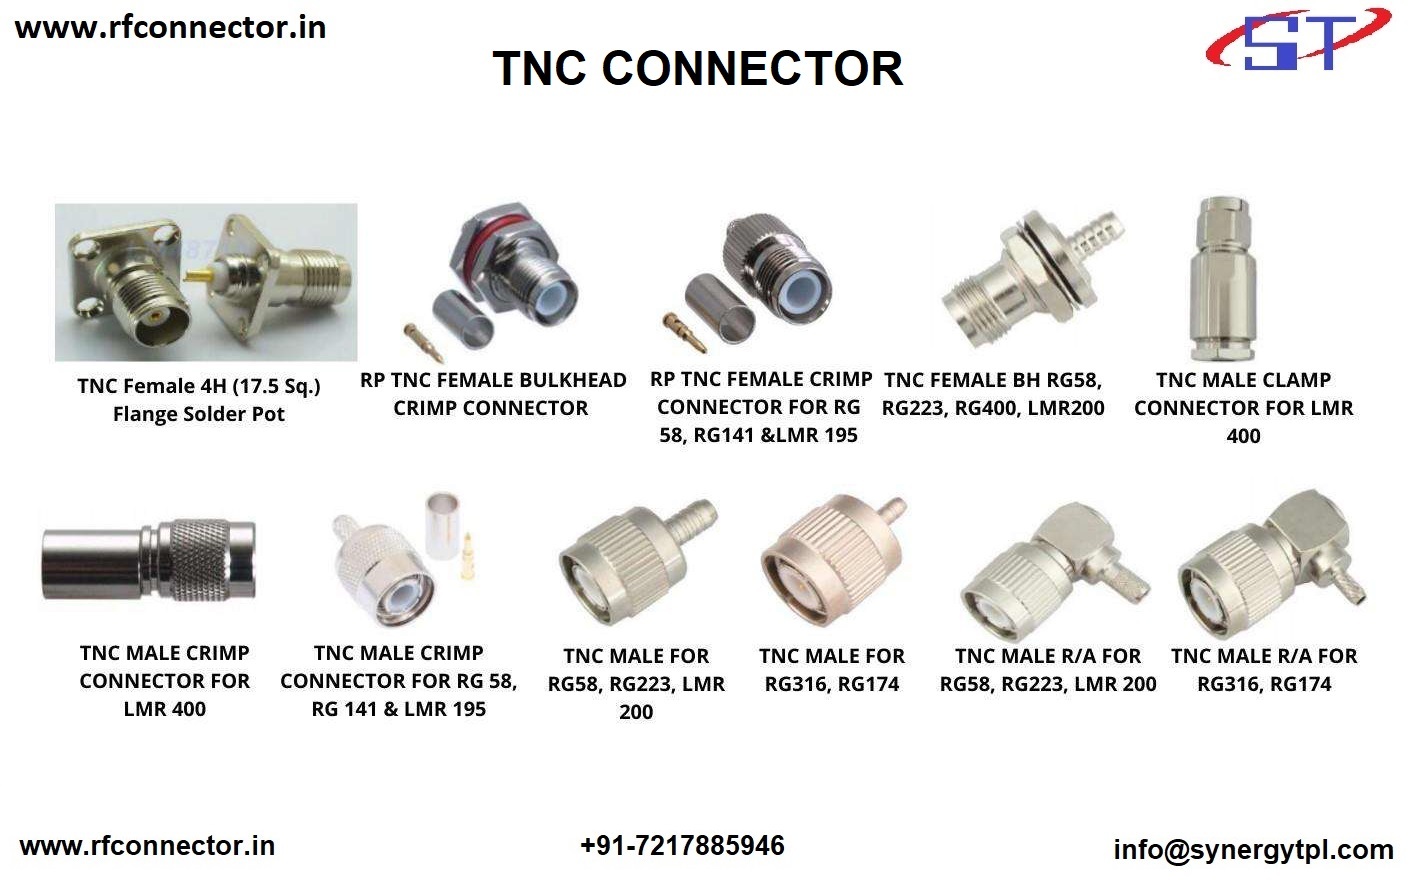 TNC female crimp connector for LMR 400 cable